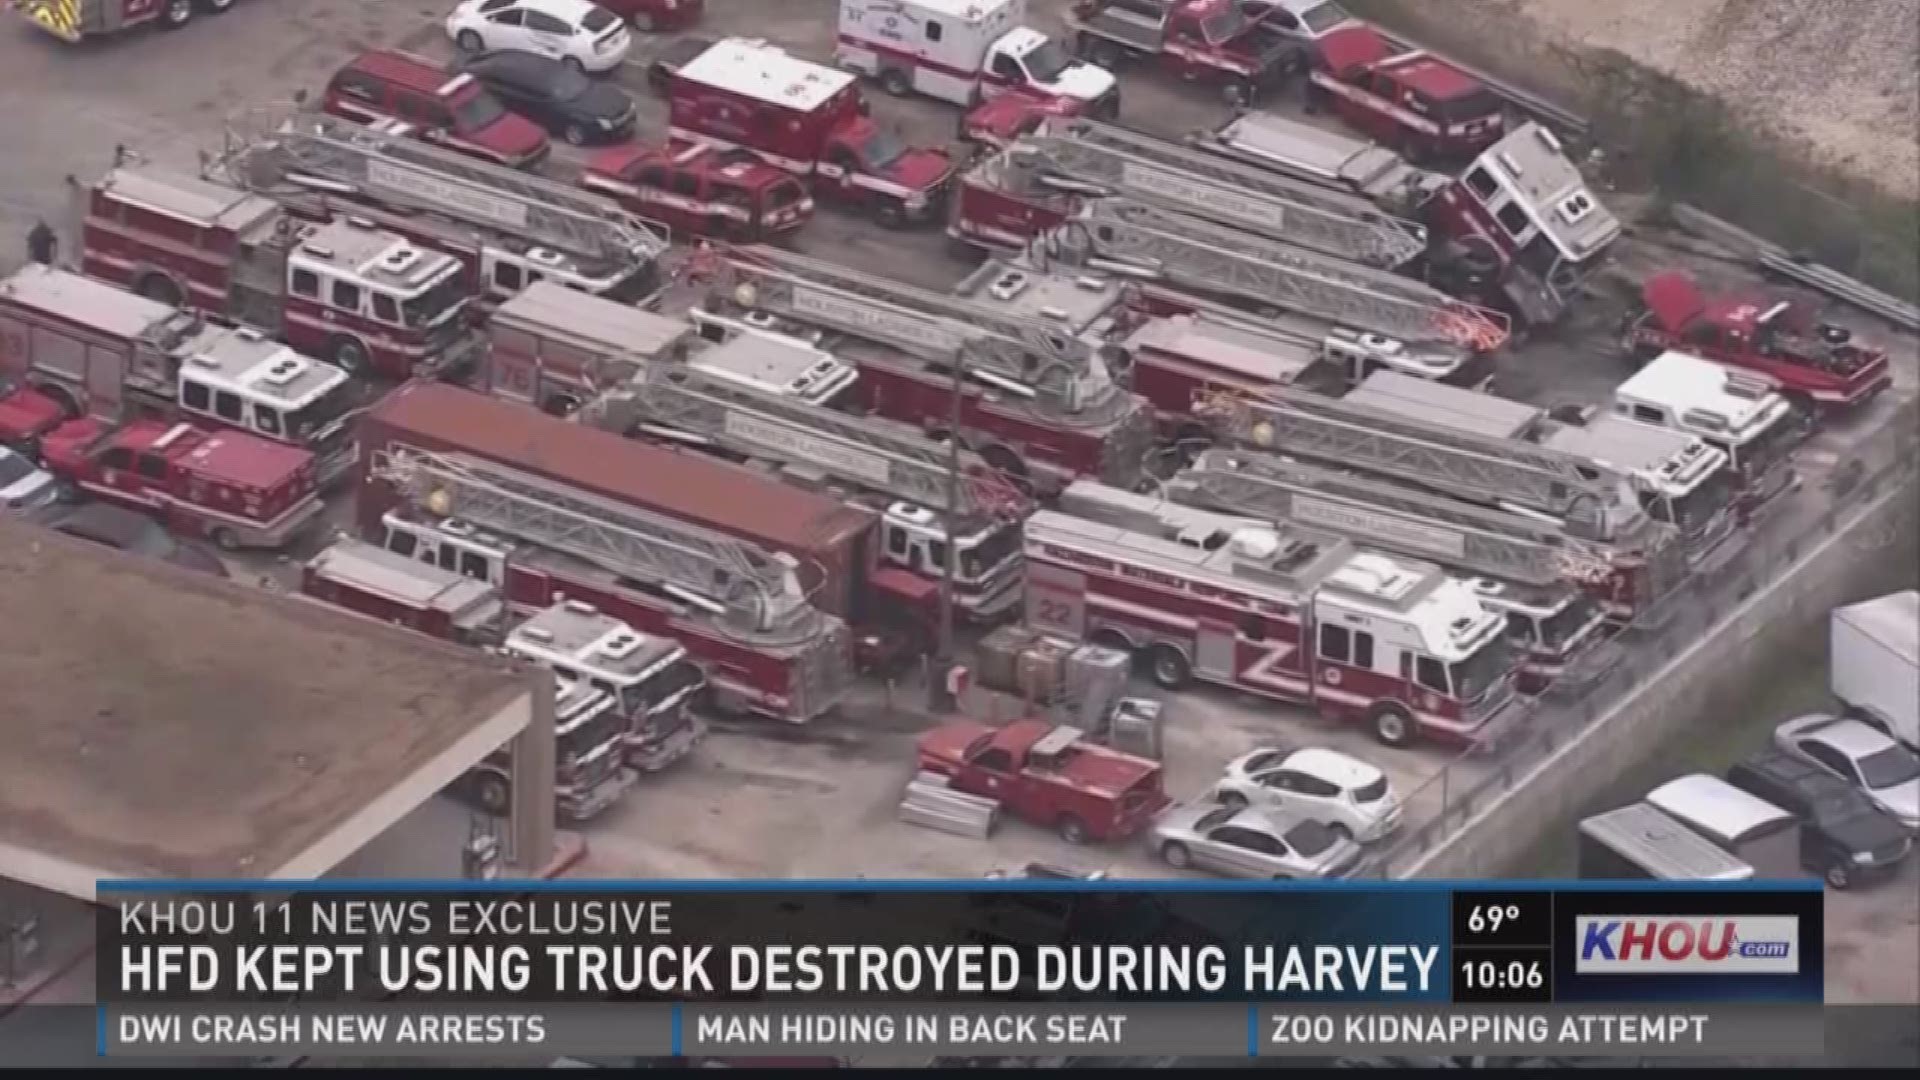 The Houston Fire Department issued a statement to KHOU 11 Thursday after reports surfaced of firefighters using a truck that flooded during Hurricane Harvey.